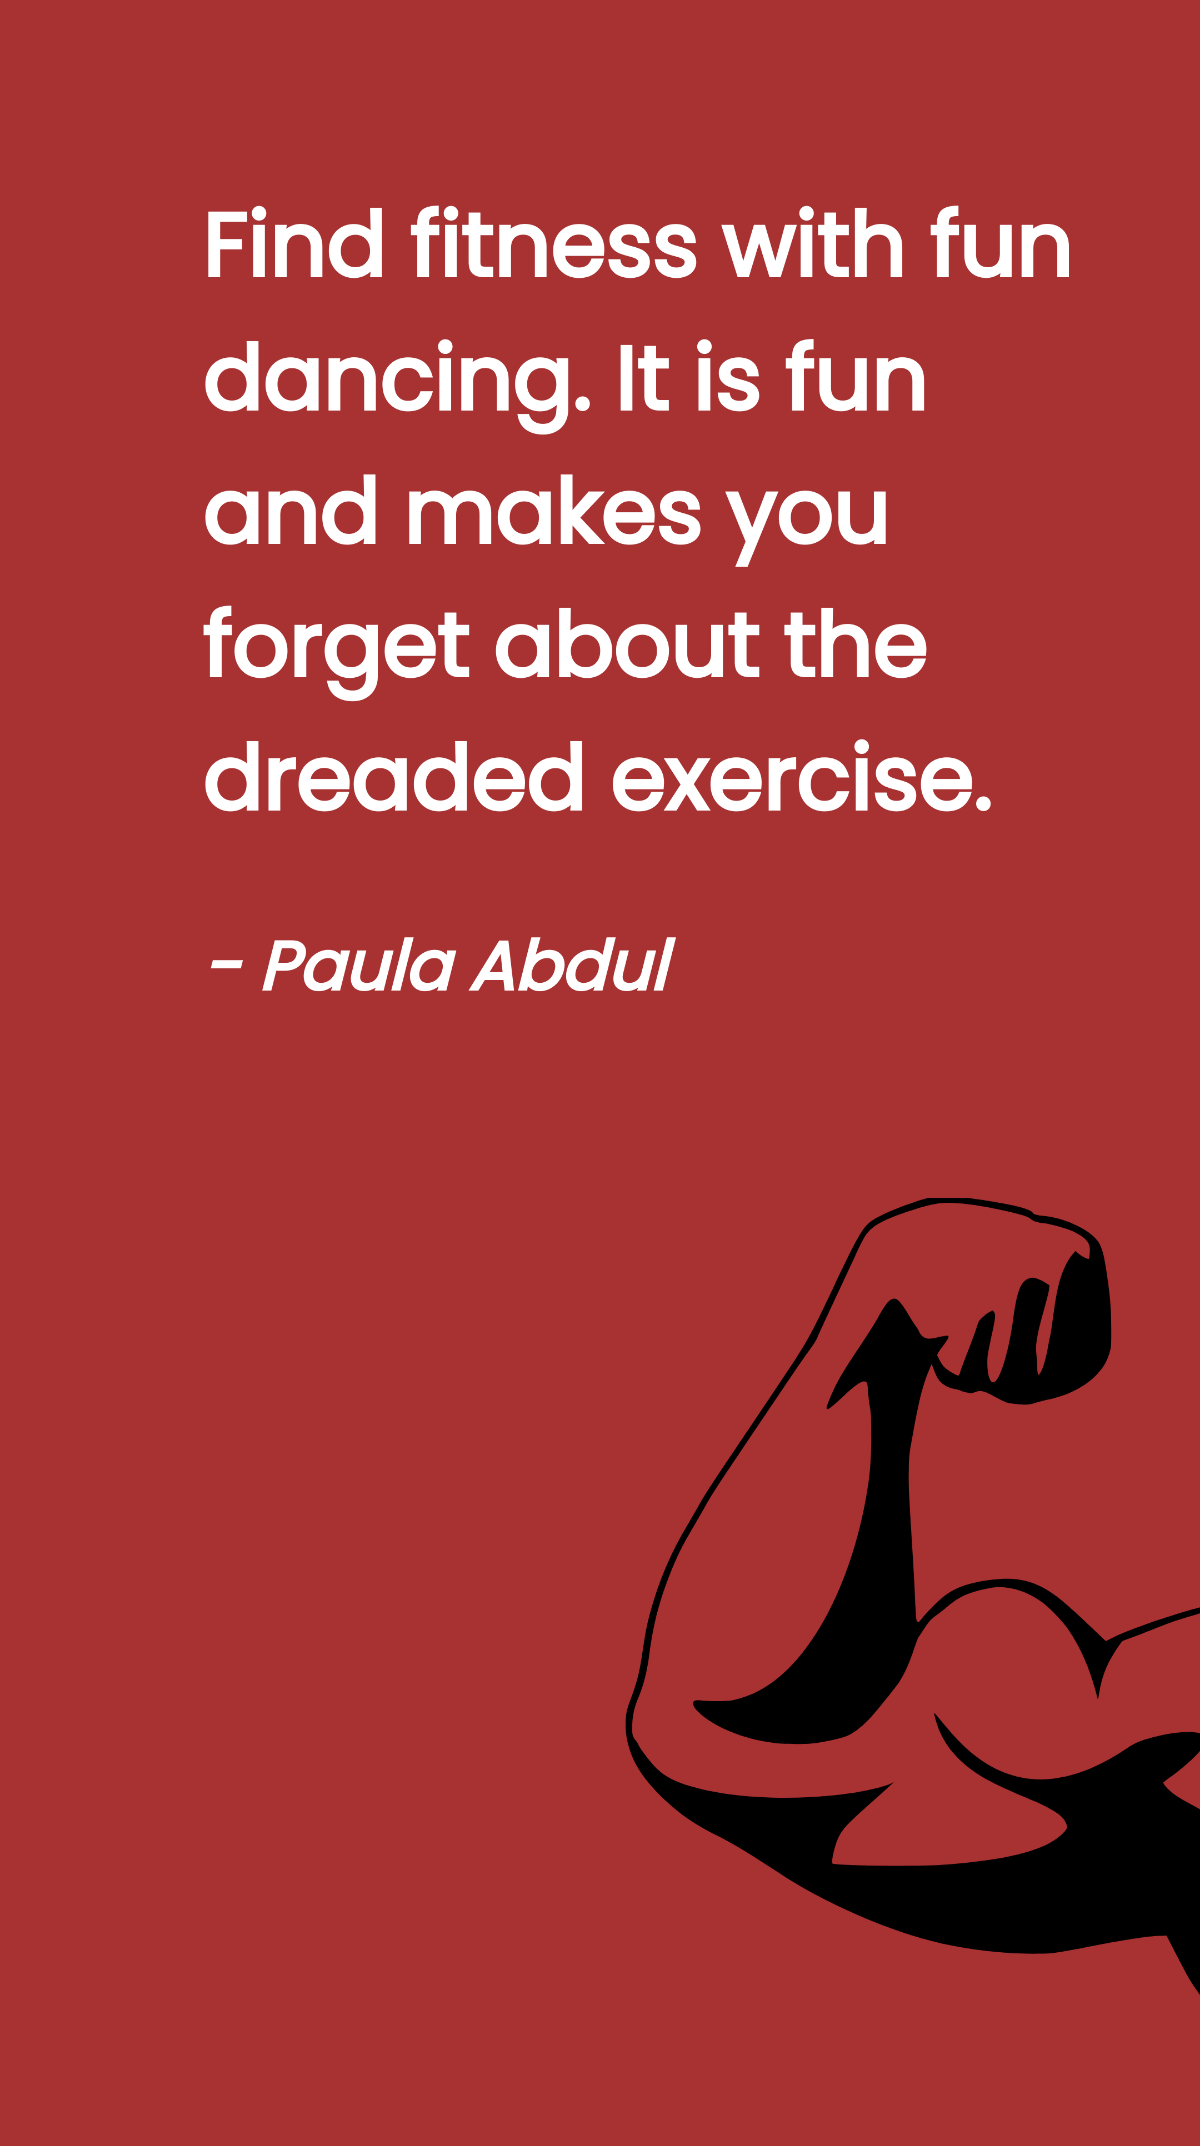 Paula Abdul - Find fitness with fun dancing. It is fun and makes you forget about the dreaded exercise. - Paula Abdul